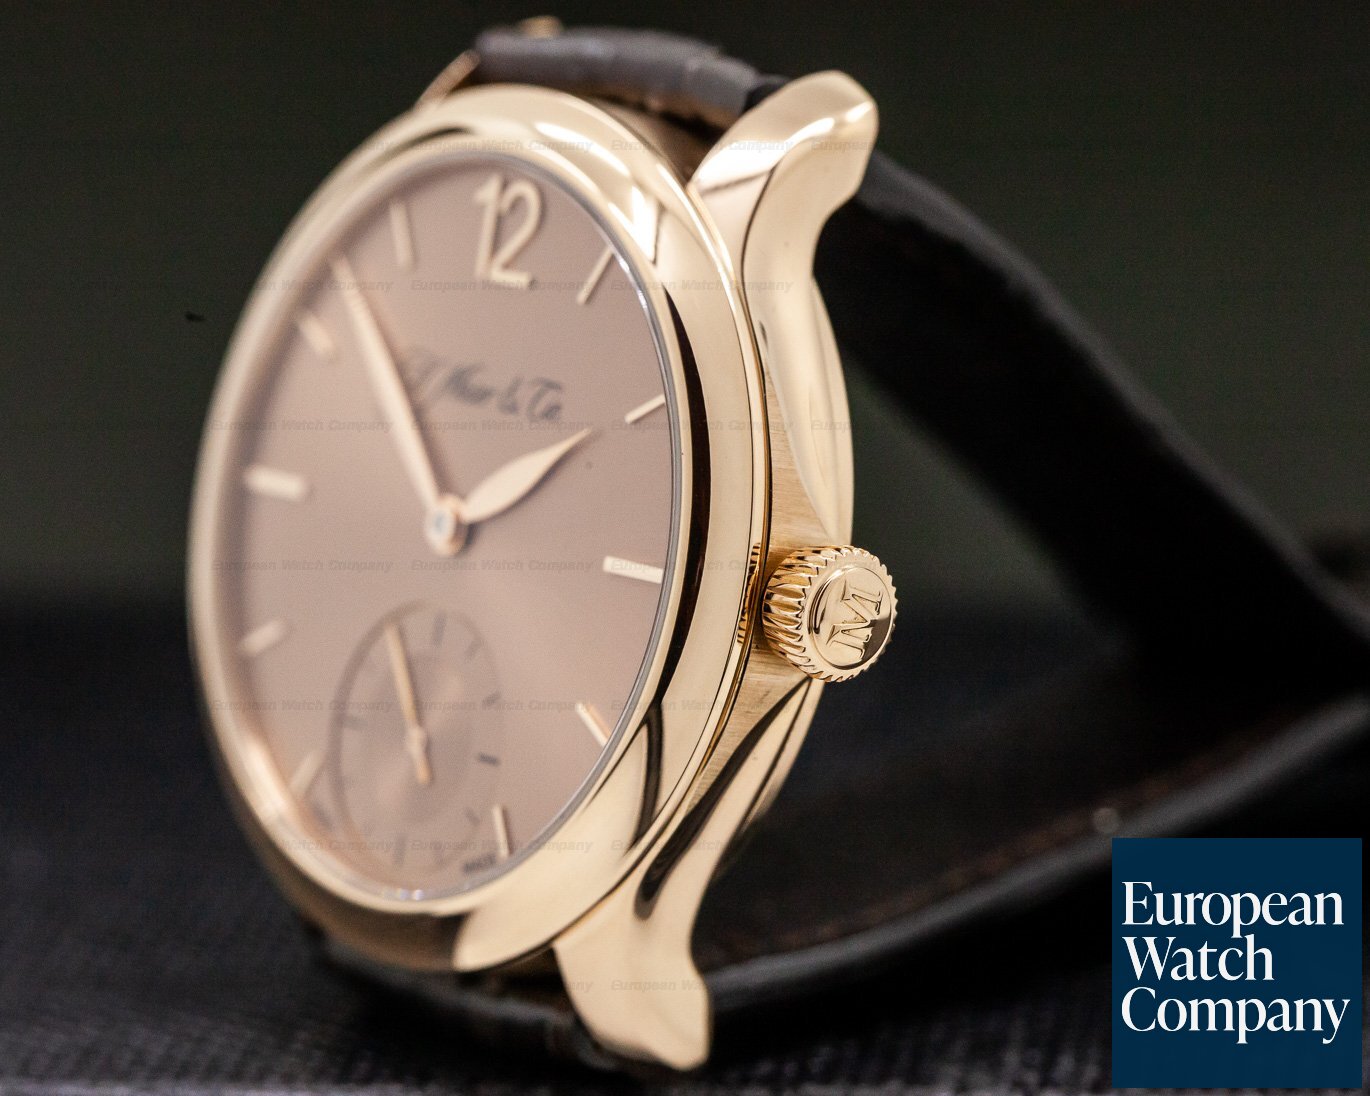 H. Moser & Cie Endeavour MAYU 18K Rose Gold Salmon Dial Ref. 321.503